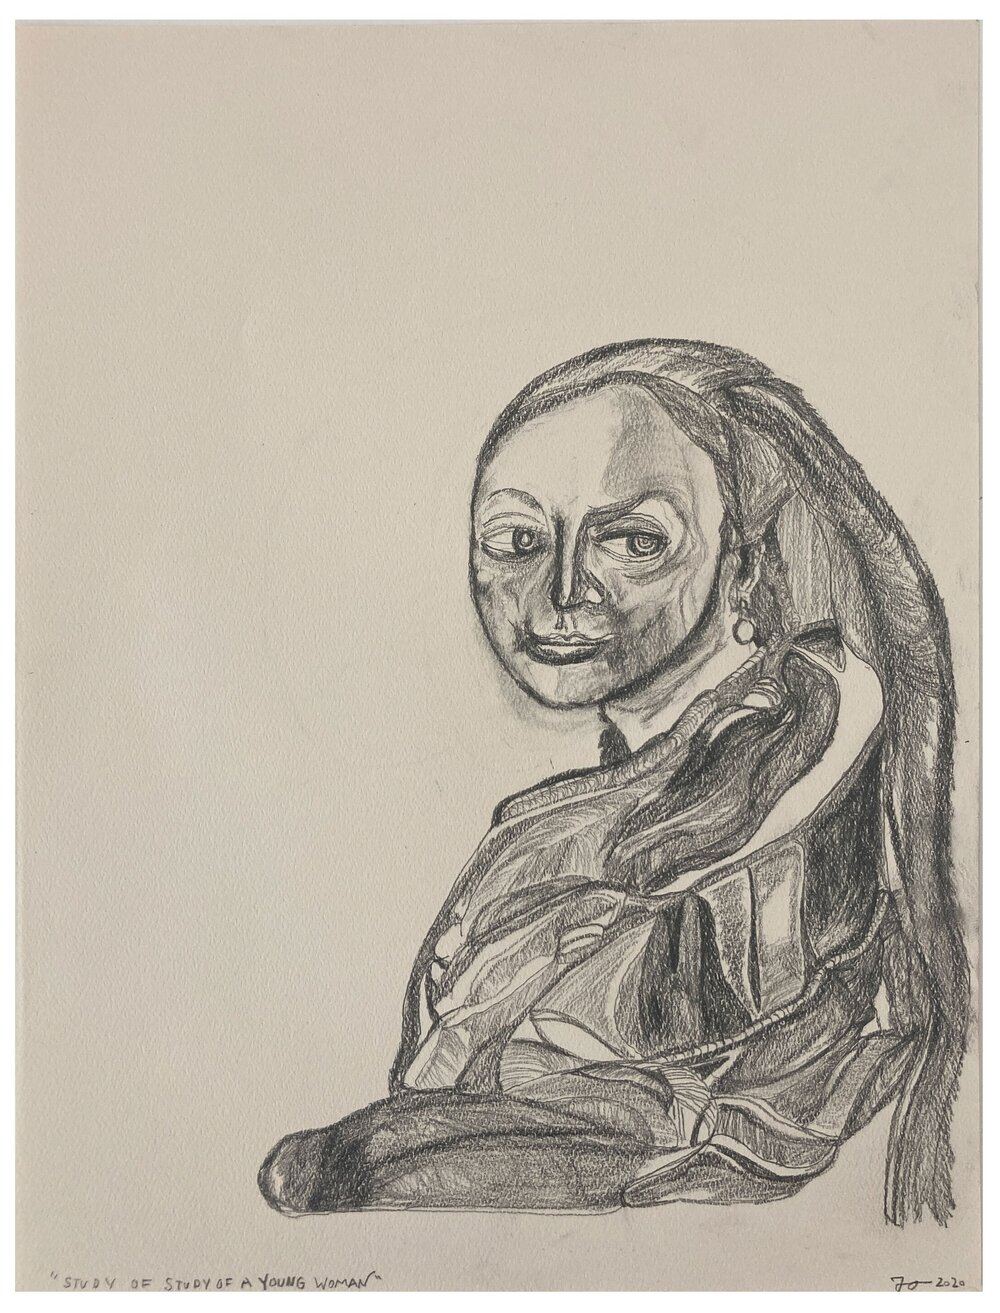 Jared Oppenheim - Study: Study of Young Woman (Vermeer)Pencil on pastel paper9 x 12 in. $400